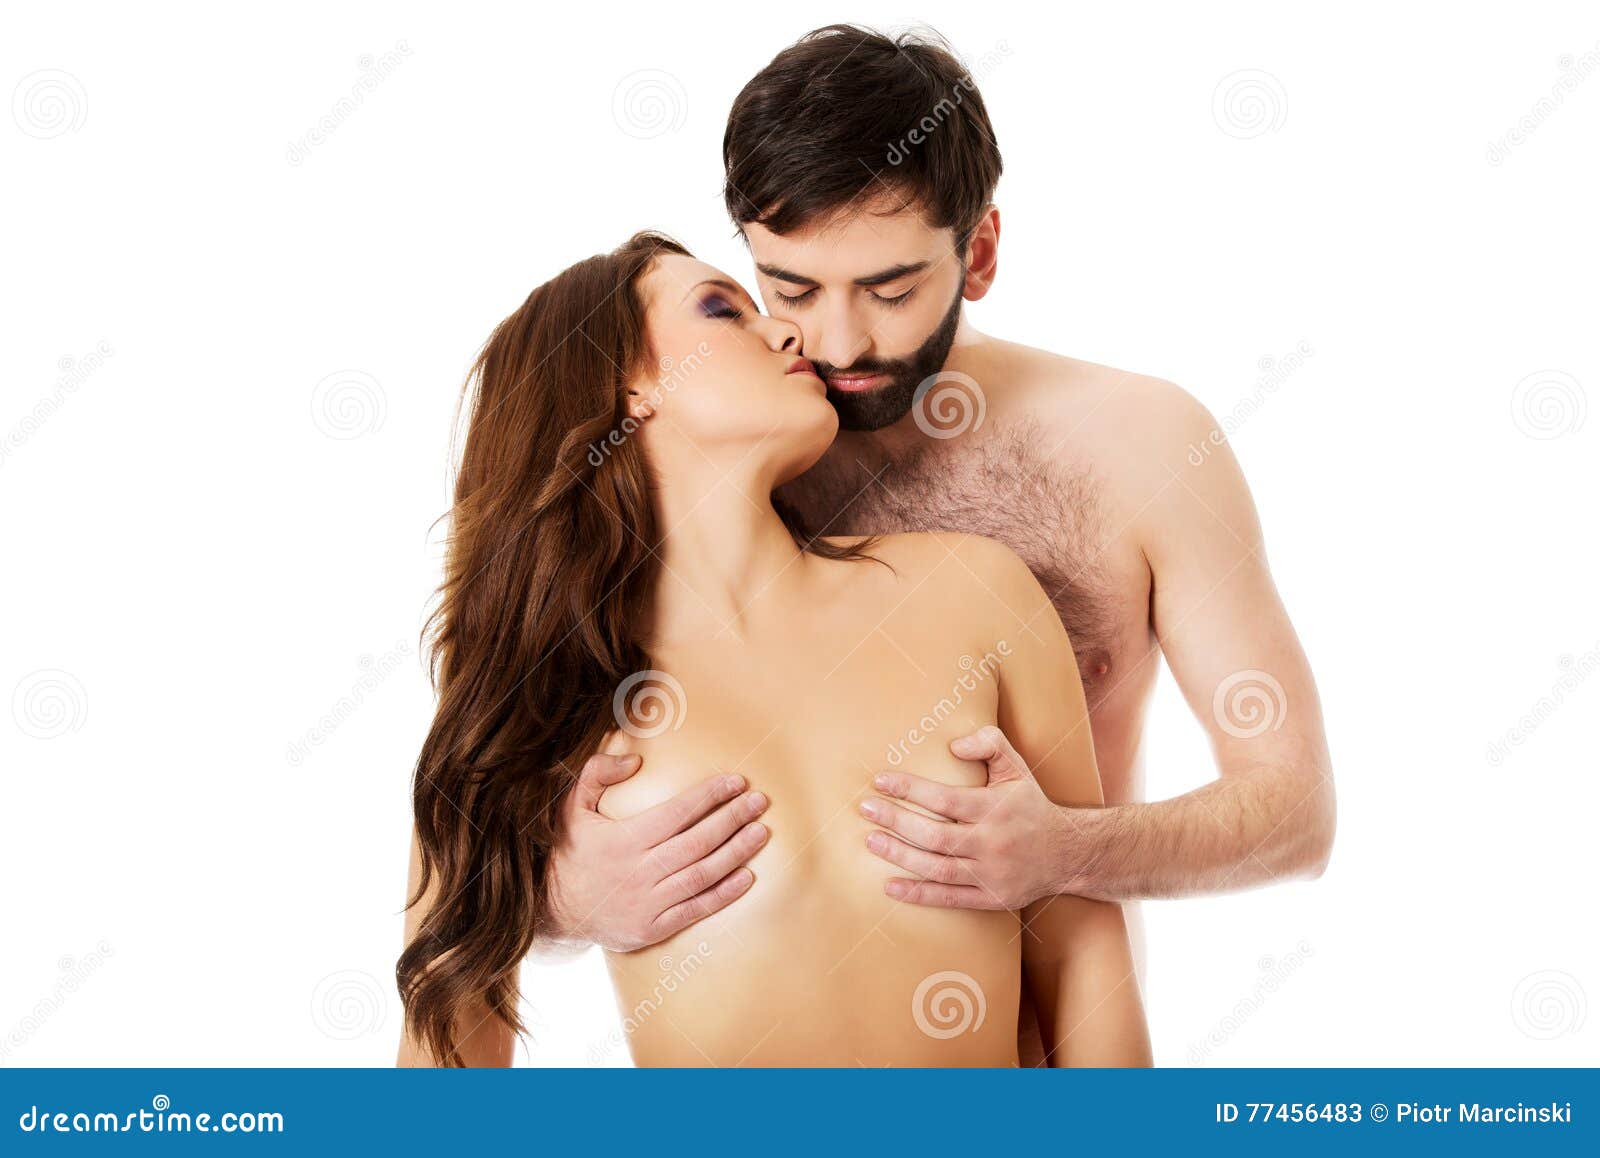 ashit sinha add photo kissing and touching boobs